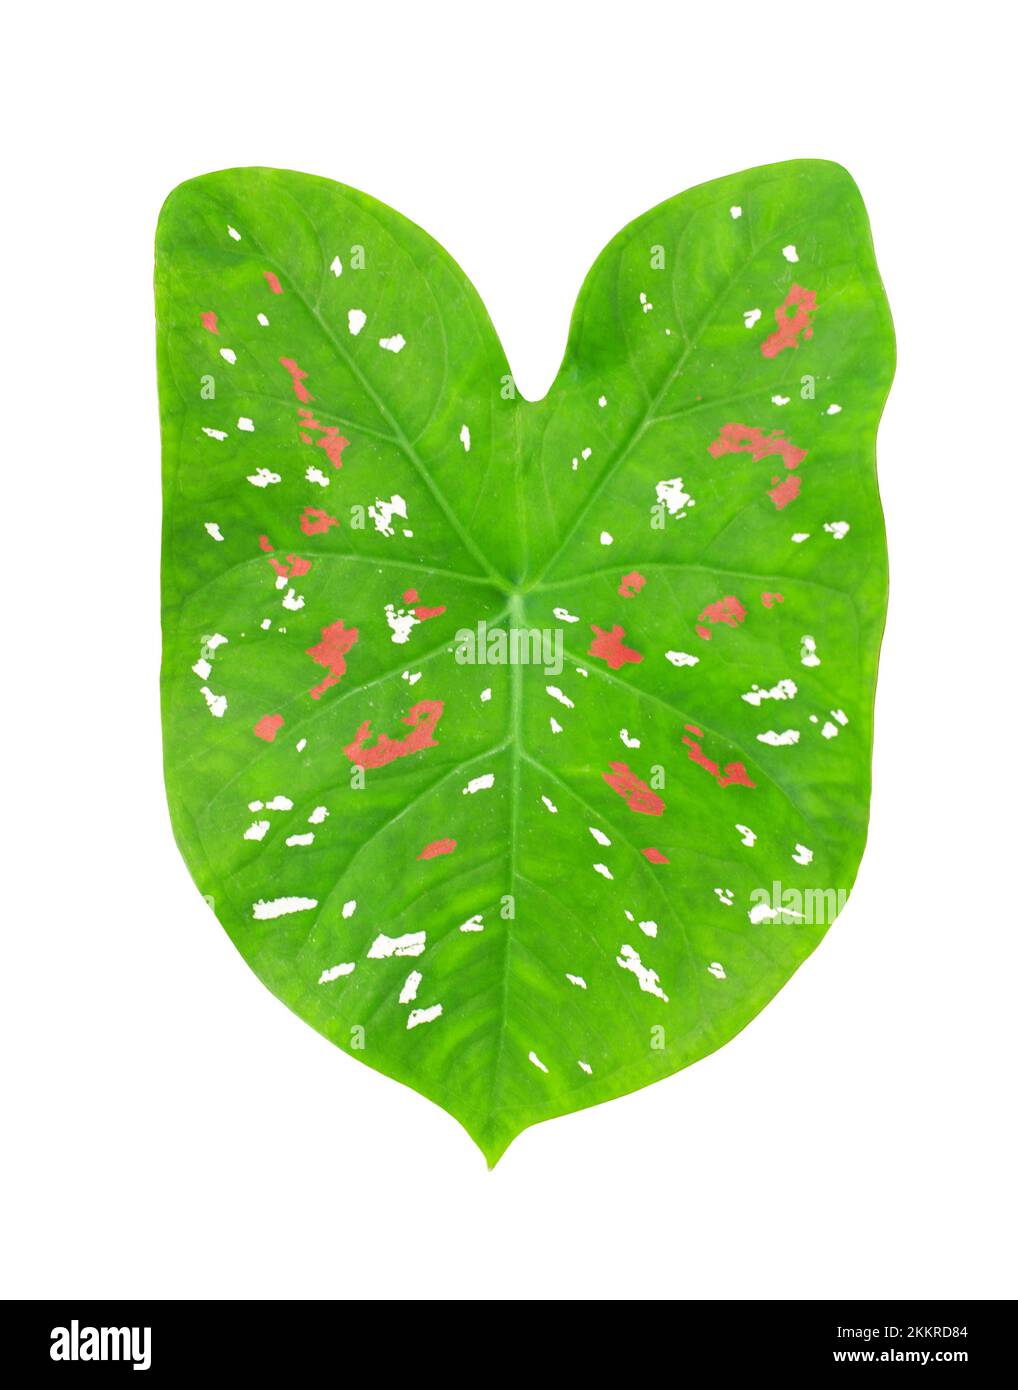 Caladium bicolor green leaf pink dots white background isolated closeup, Philodendron colorful red spots leaves, araceae exotic tropical plant, floral Stock Photo